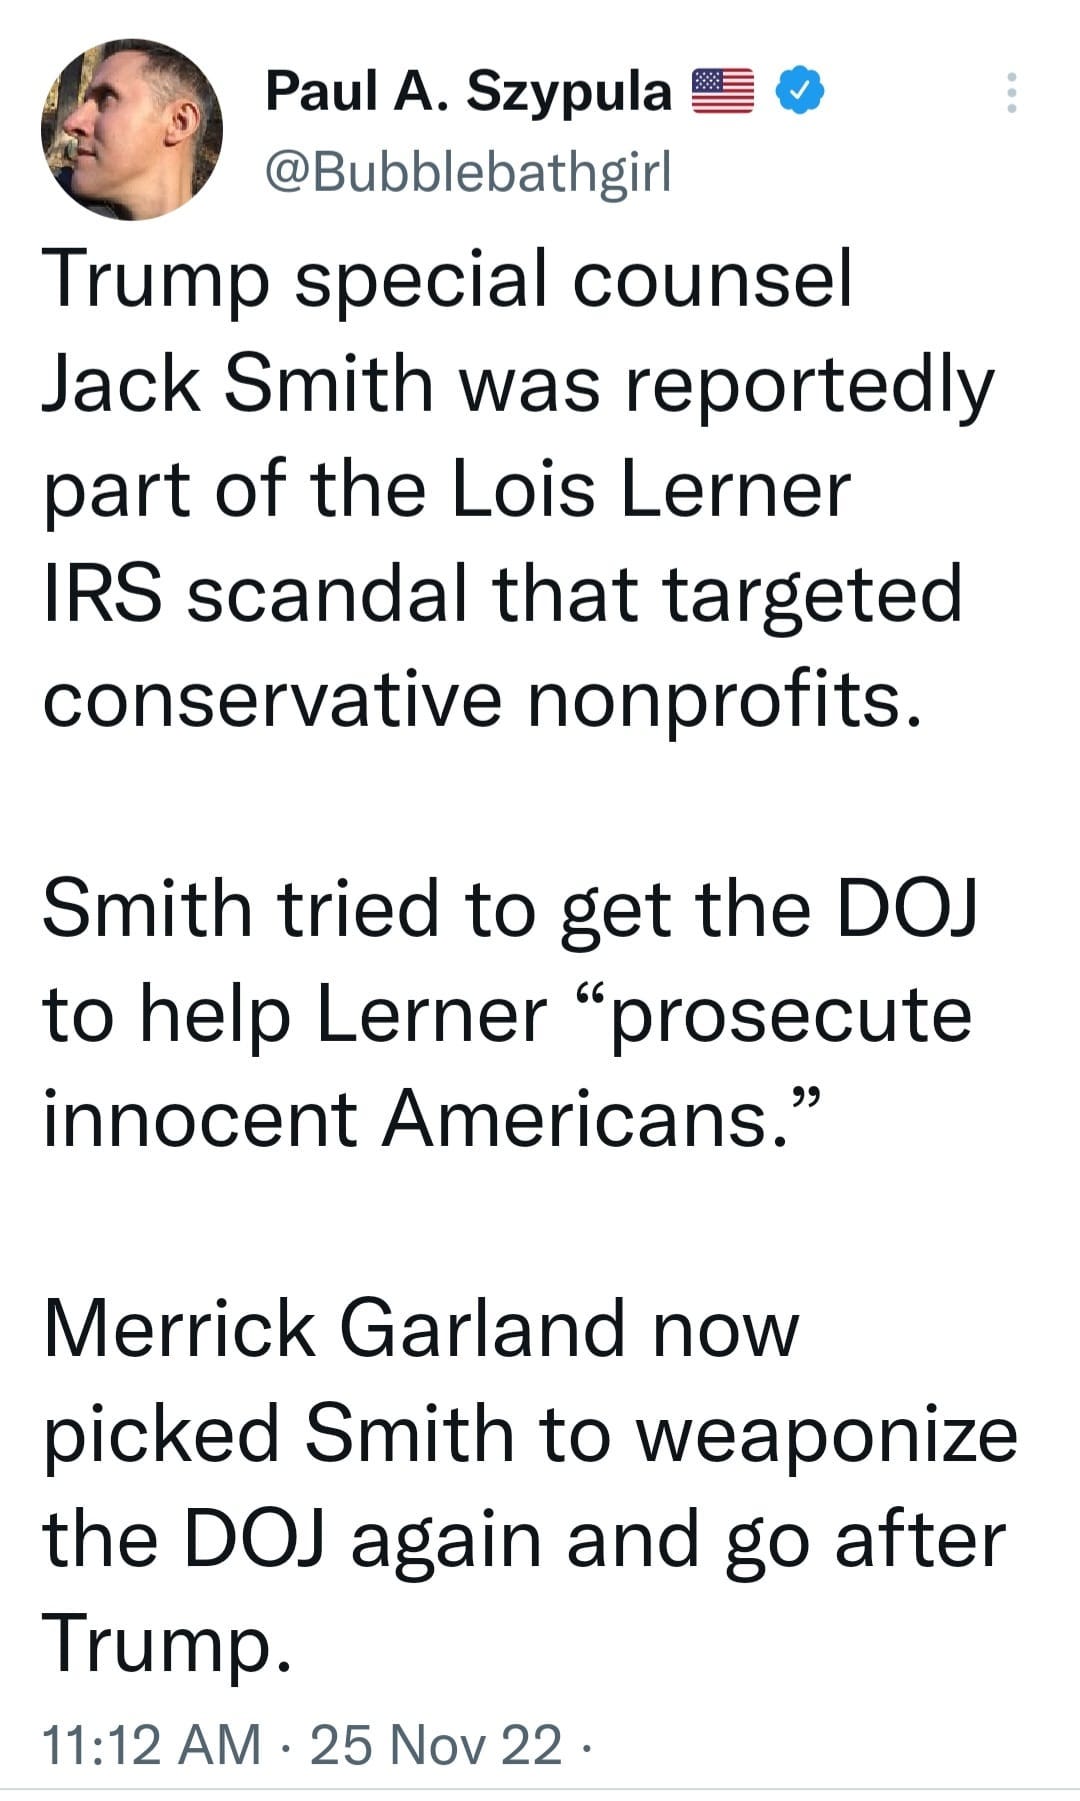 May be an image of 1 person and text that says 'Paul A. Szypula @Bubblebathgirl Trump special counsel Jack Smith was reportedly part of the Lois Lerner IRS scandal that targeted conservative nonprofits. Smith tried to get the DOJ to help Lerner "prosecute innocent Americans." Merrick Garland now picked Smith to weaponize the DOJ again and go after Trump. 11:12 AM 25 Nov 22. 22'